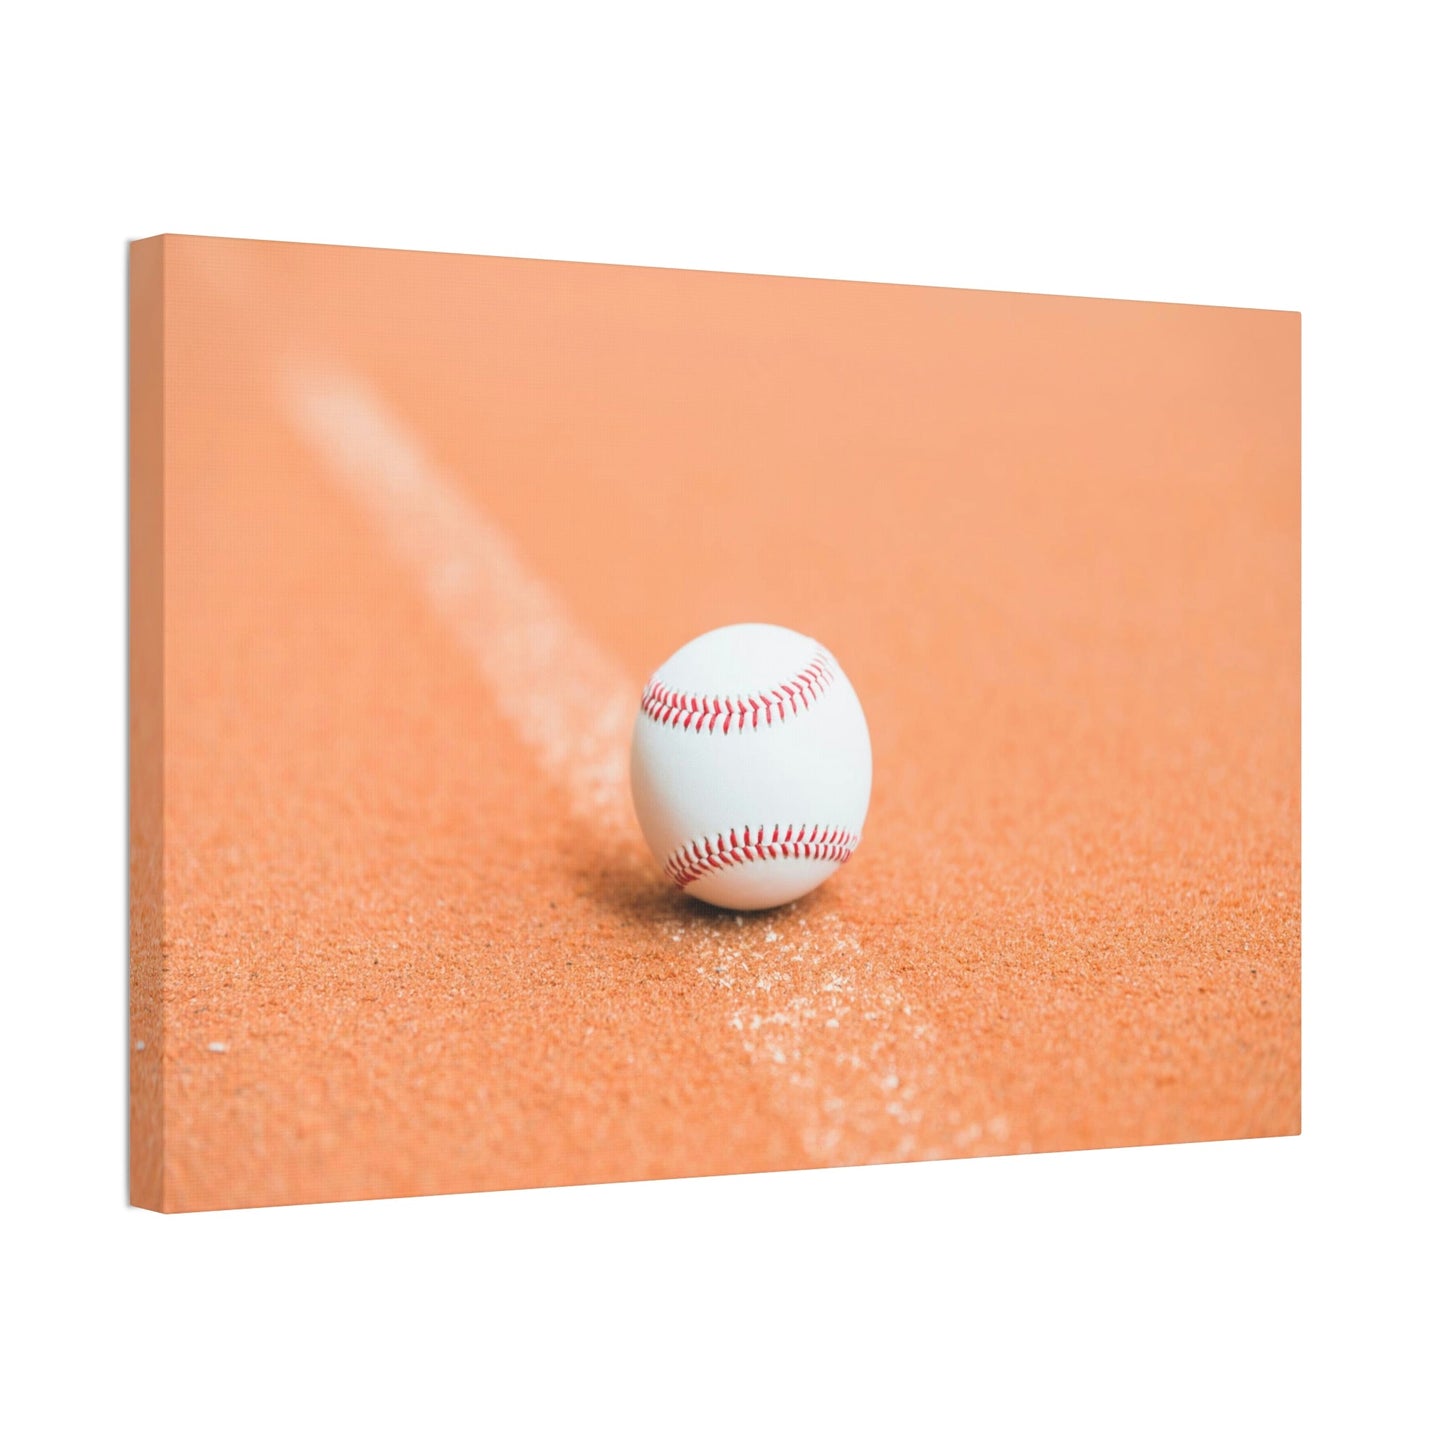 Baseball Magic: Print on Canvas and Framed Posters for Fans of the Game